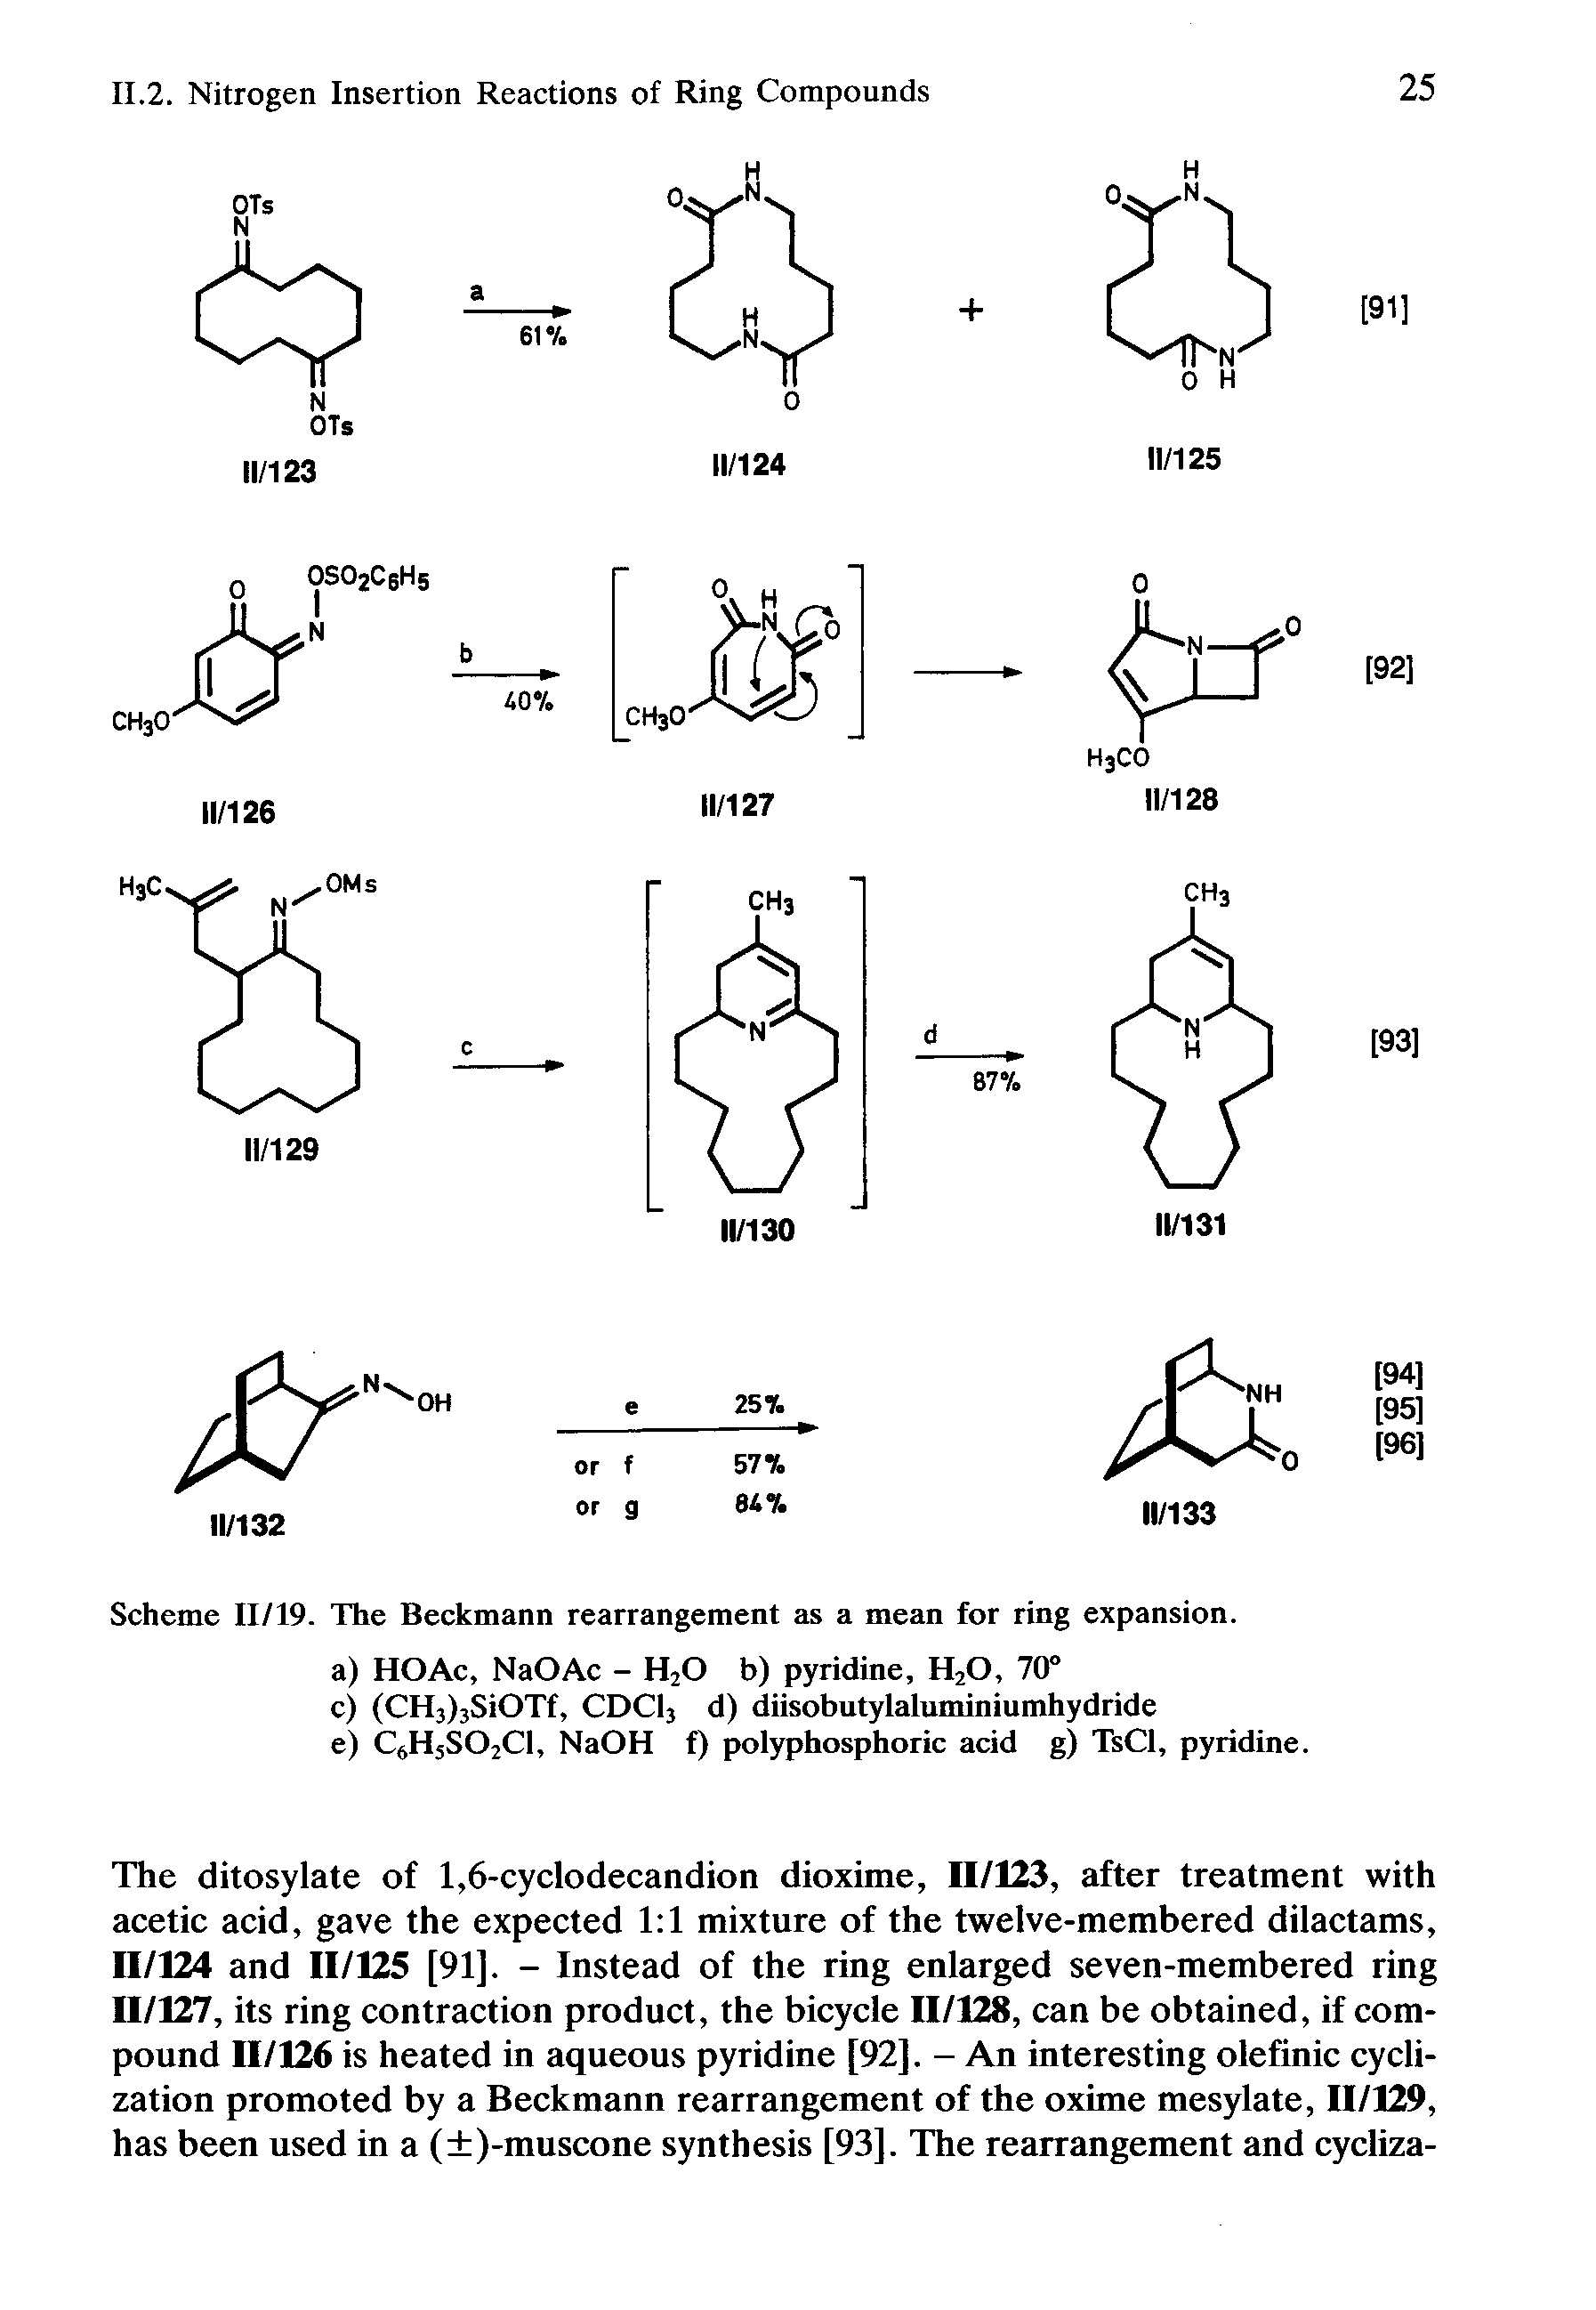 Scheme 11/19. The Beckmann rearrangement as a mean for ring expansion.